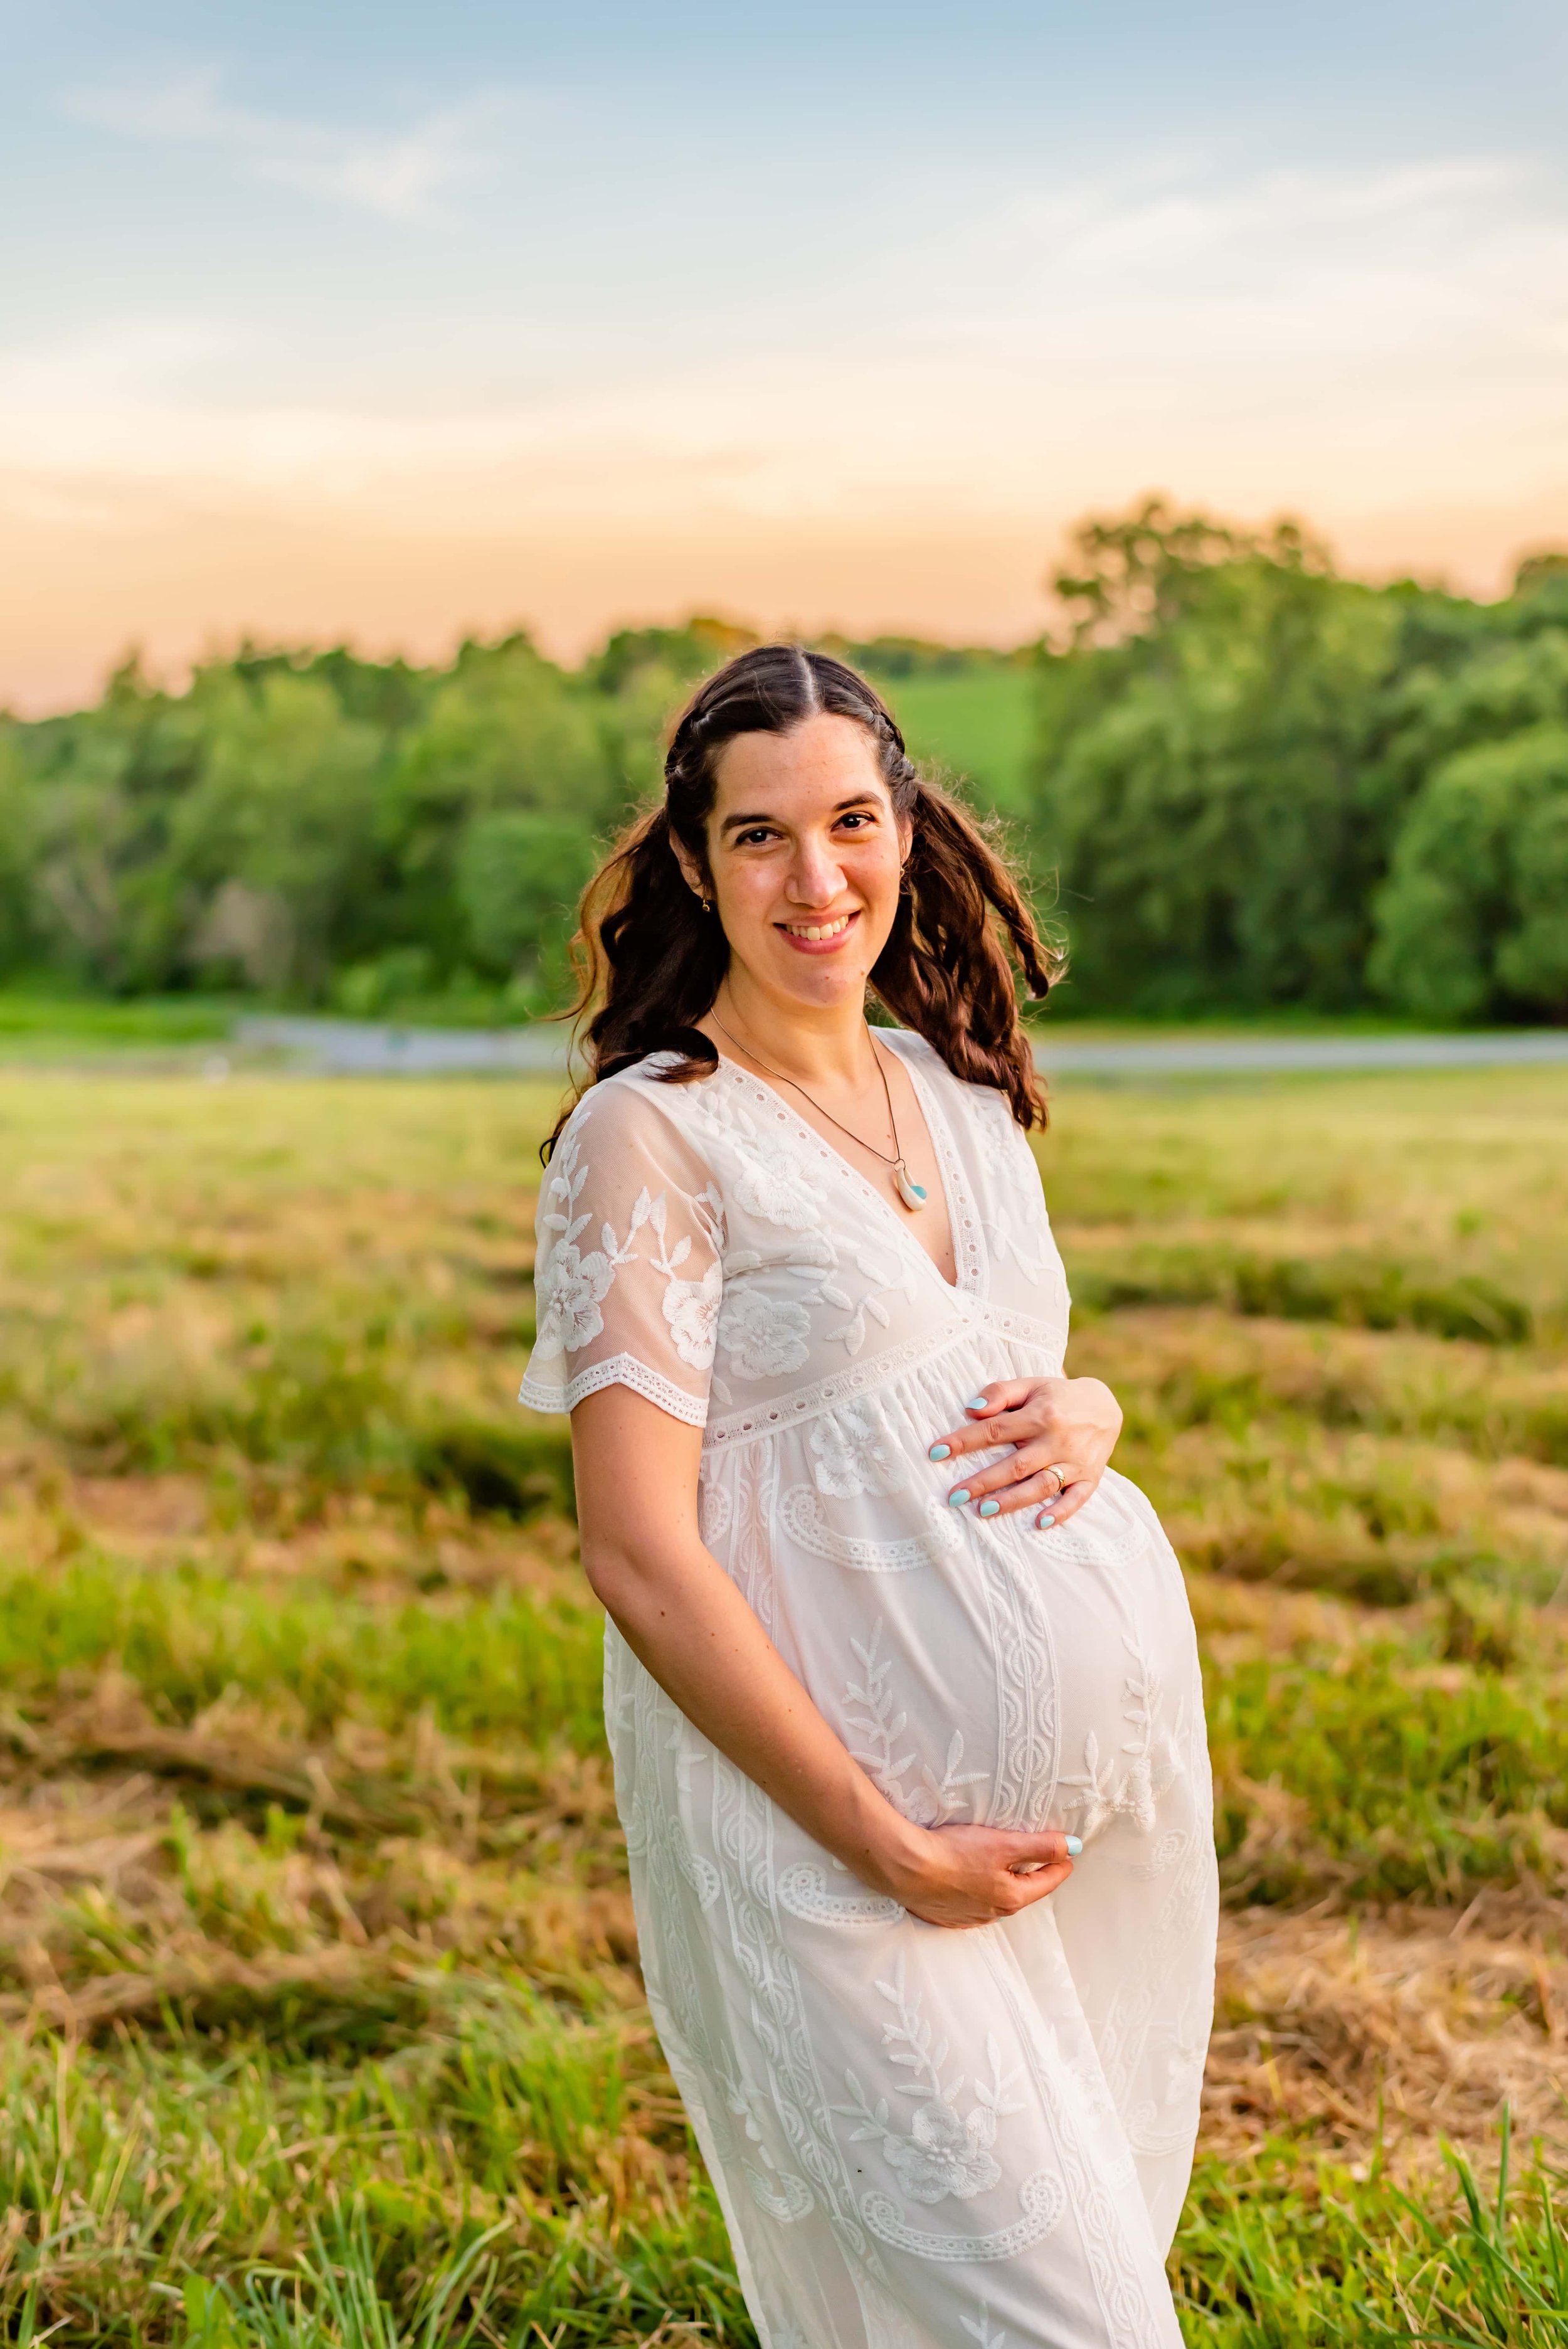 Maternity photo of woman in Maryland standing in a field smiling at the camera